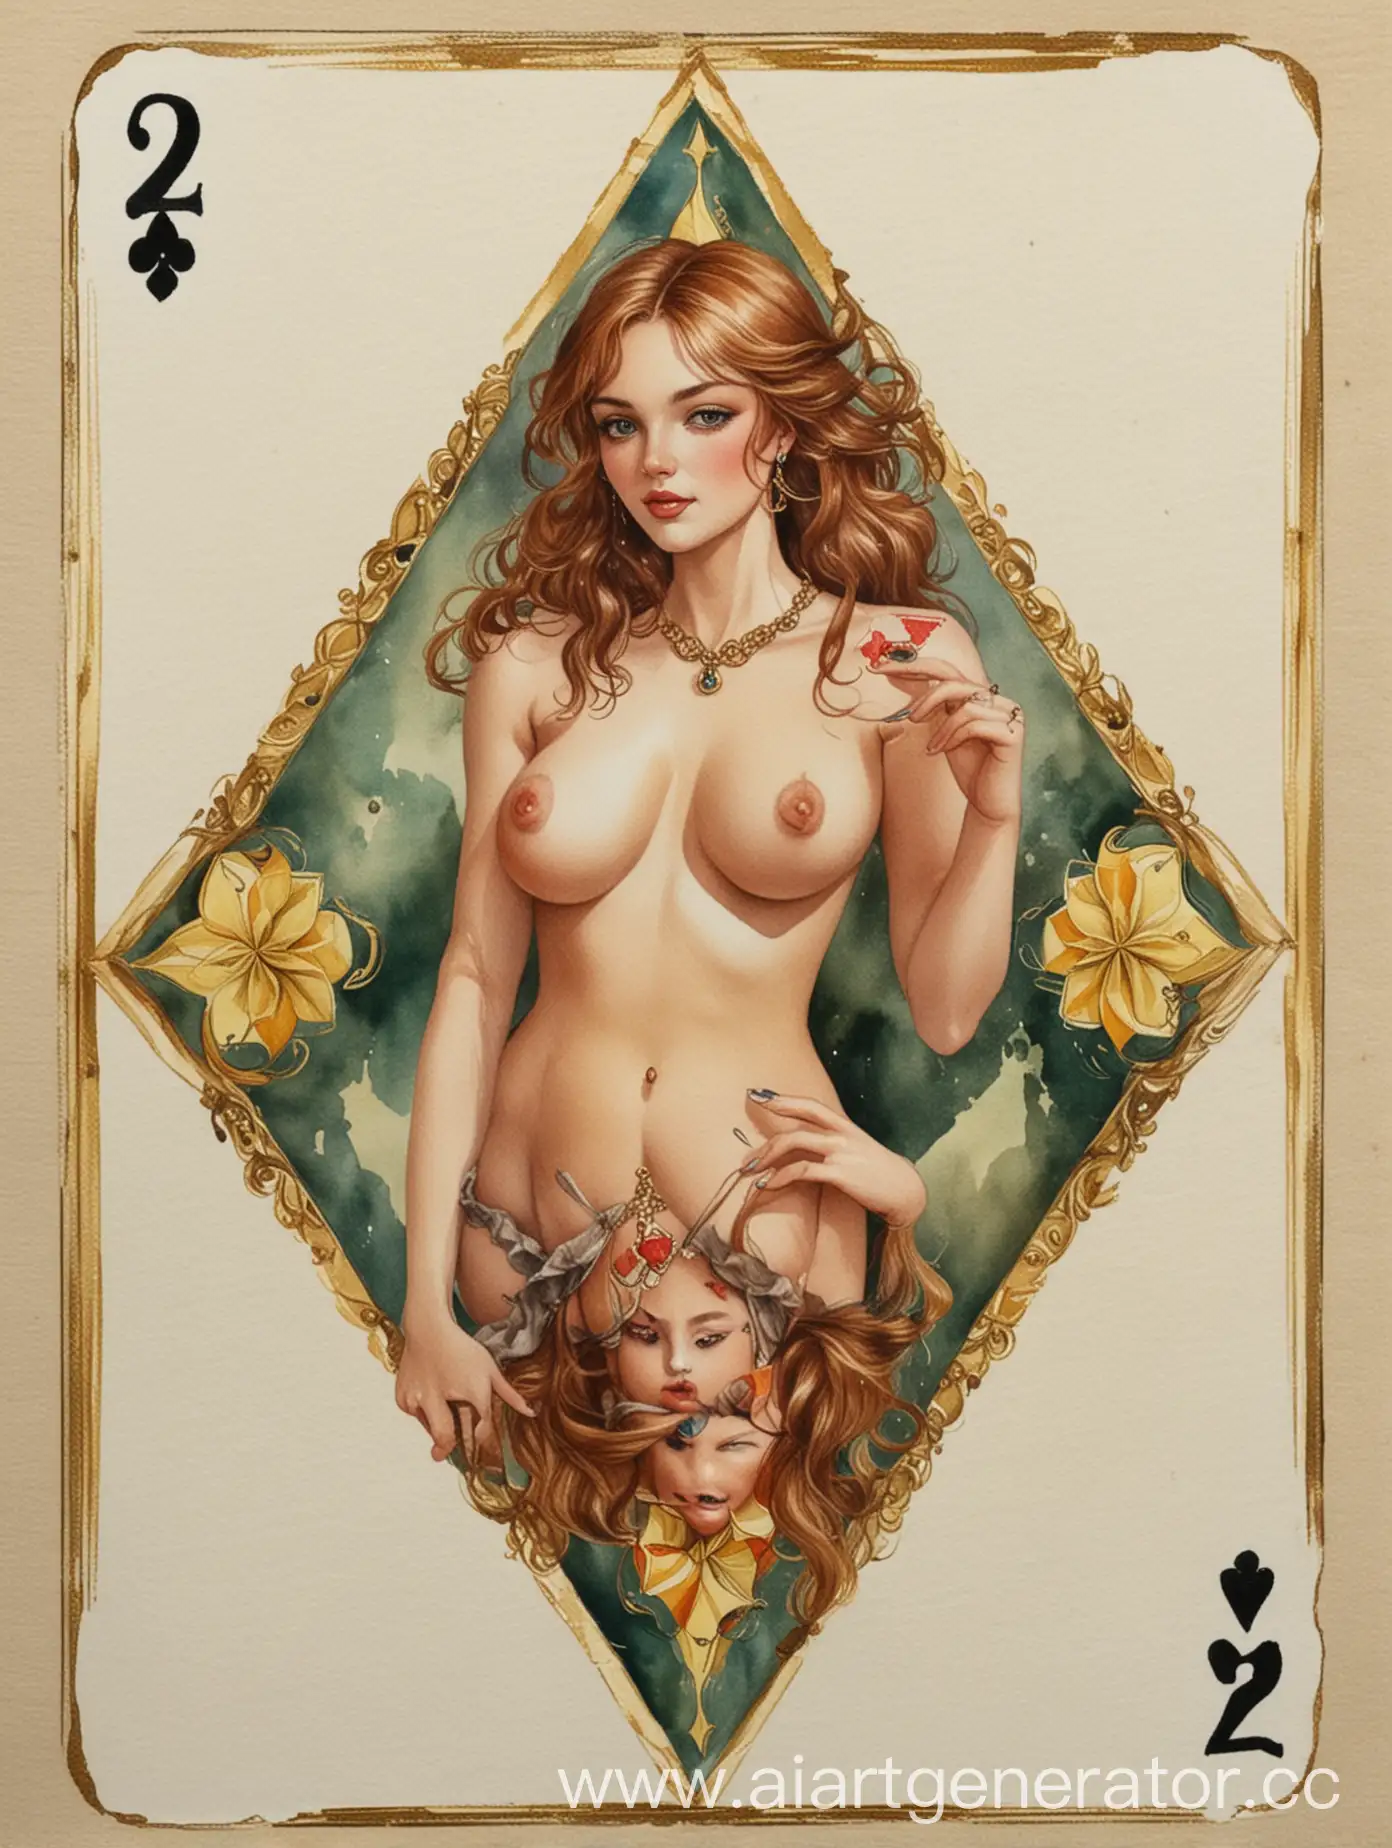 Watercolor-Erotic-Playing-Card-Two-of-Diamonds-with-Buxom-Beauty